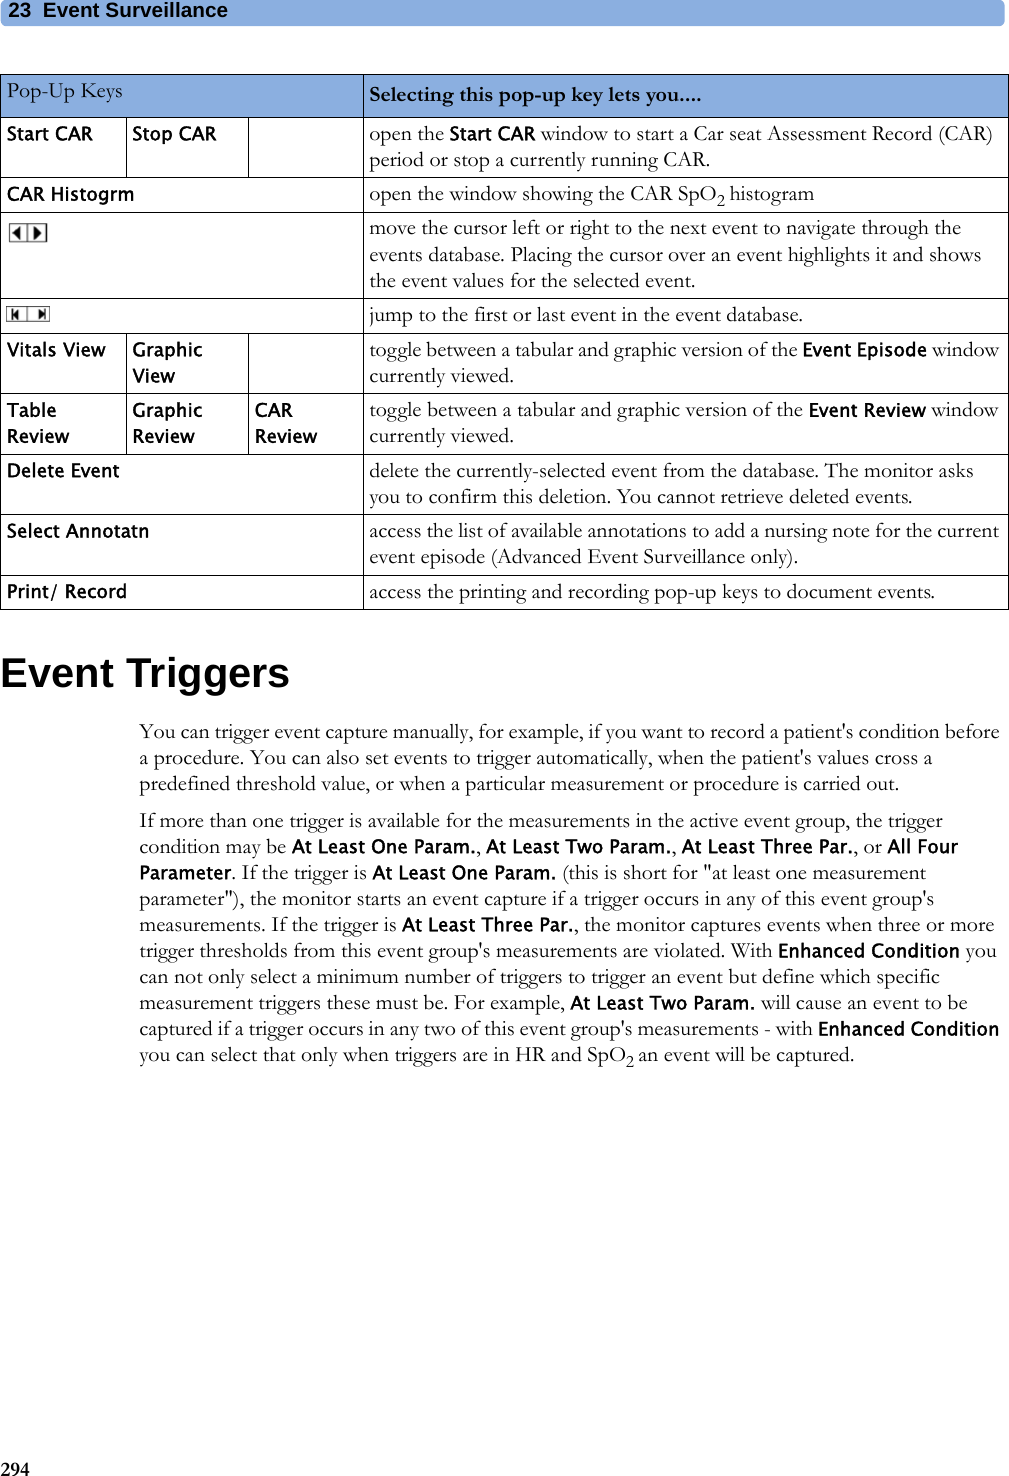 23 Event Surveillance294Event TriggersYou can trigger event capture manually, for example, if you want to record a patient&apos;s condition before a procedure. You can also set events to trigger automatically, when the patient&apos;s values cross a predefined threshold value, or when a particular measurement or procedure is carried out.If more than one trigger is available for the measurements in the active event group, the trigger condition may be At Least One Param., At Least Two Param., At Least Three Par., or All Four Parameter. If the trigger is At Least One Param. (this is short for &quot;at least one measurement parameter&quot;), the monitor starts an event capture if a trigger occurs in any of this event group&apos;s measurements. If the trigger is At Least Three Par., the monitor captures events when three or more trigger thresholds from this event group&apos;s measurements are violated. With Enhanced Condition you can not only select a minimum number of triggers to trigger an event but define which specific measurement triggers these must be. For example, At Least Two Param. will cause an event to be captured if a trigger occurs in any two of this event group&apos;s measurements - with Enhanced Condition you can select that only when triggers are in HR and SpO2 an event will be captured.Start CAR Stop CAR open the Start CAR window to start a Car seat Assessment Record (CAR) period or stop a currently running CAR.CAR Histogrm open the window showing the CAR SpO2 histogrammove the cursor left or right to the next event to navigate through the events database. Placing the cursor over an event highlights it and shows the event values for the selected event.jump to the first or last event in the event database.Vitals View Graphic Viewtoggle between a tabular and graphic version of the Event Episode window currently viewed.Table ReviewGraphic ReviewCAR Reviewtoggle between a tabular and graphic version of the Event Review window currently viewed.Delete Event delete the currently-selected event from the database. The monitor asks you to confirm this deletion. You cannot retrieve deleted events.Select Annotatn access the list of available annotations to add a nursing note for the current event episode (Advanced Event Surveillance only).Print/ Record access the printing and recording pop-up keys to document events.Pop-Up Keys Selecting this pop-up key lets you....